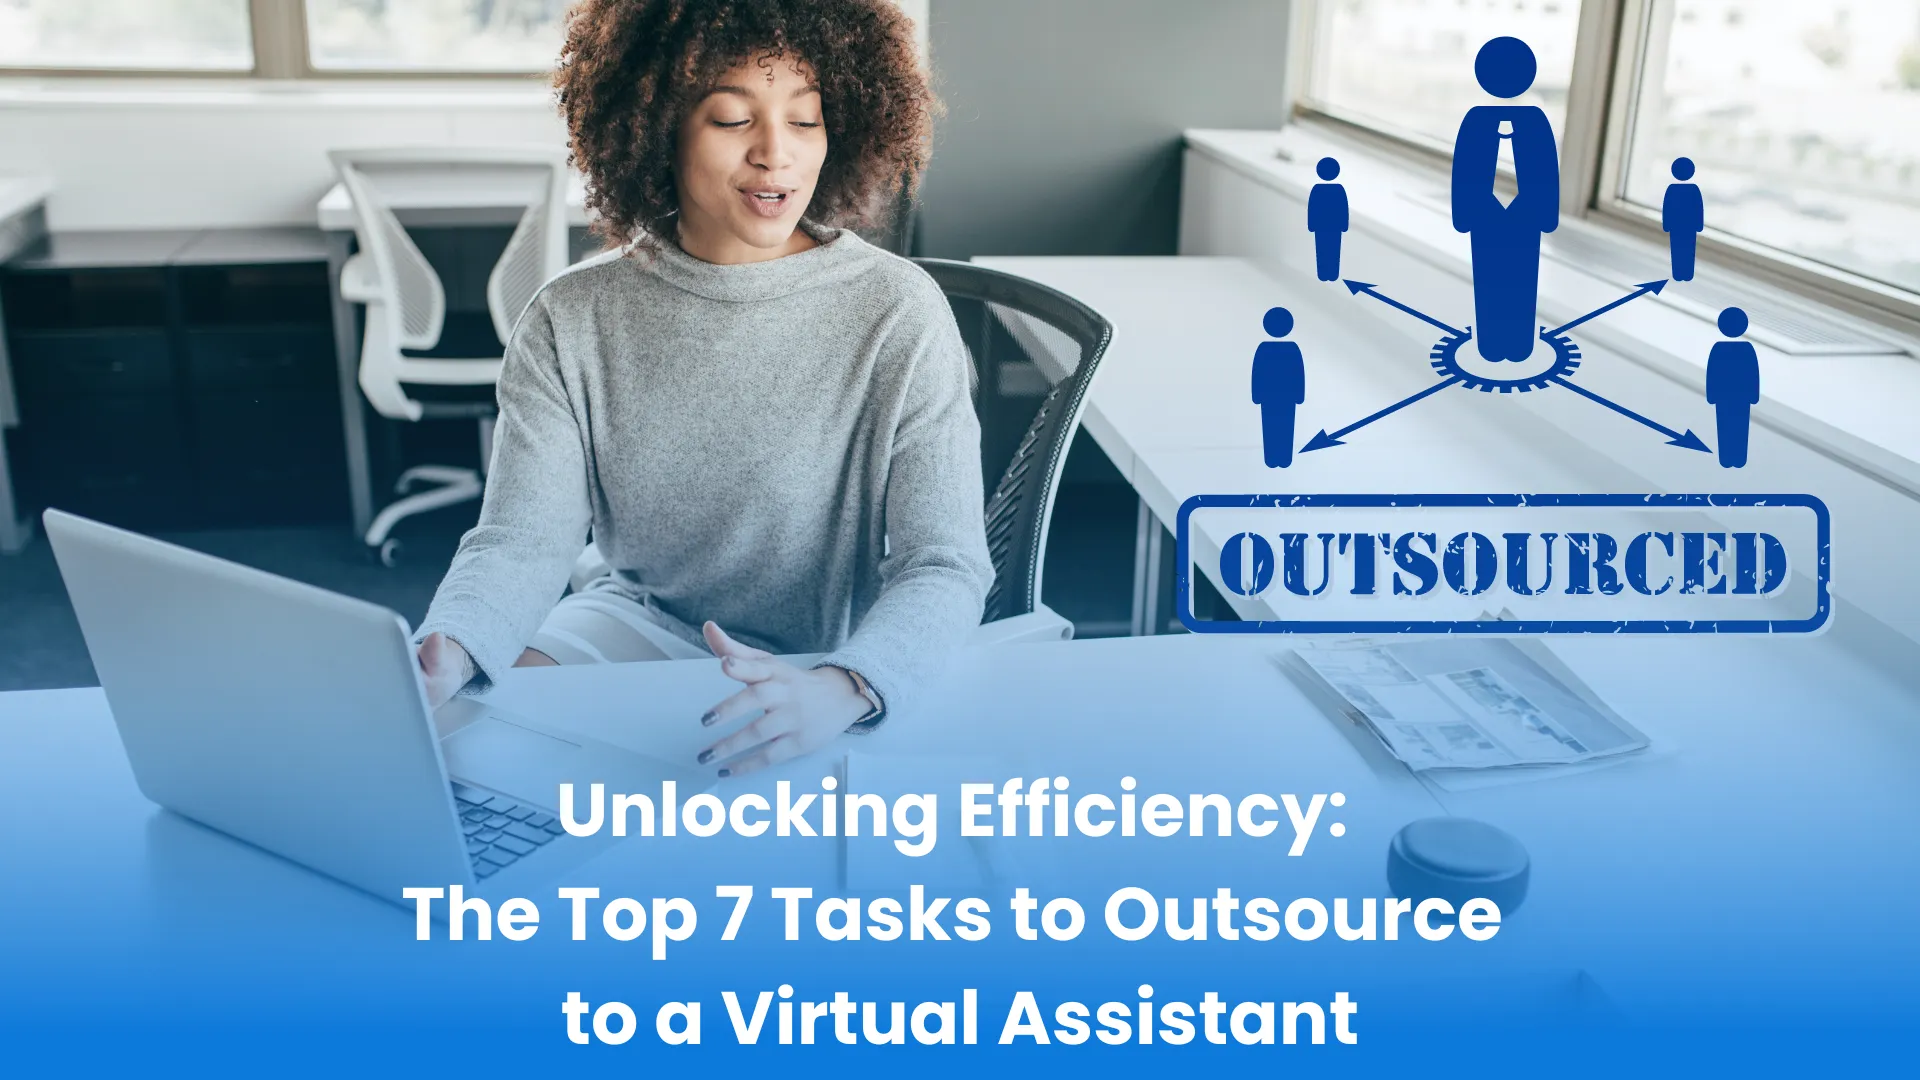 Unlocking Efficiency: The Top 7 Tasks to Outsource to a Virtual Assistant